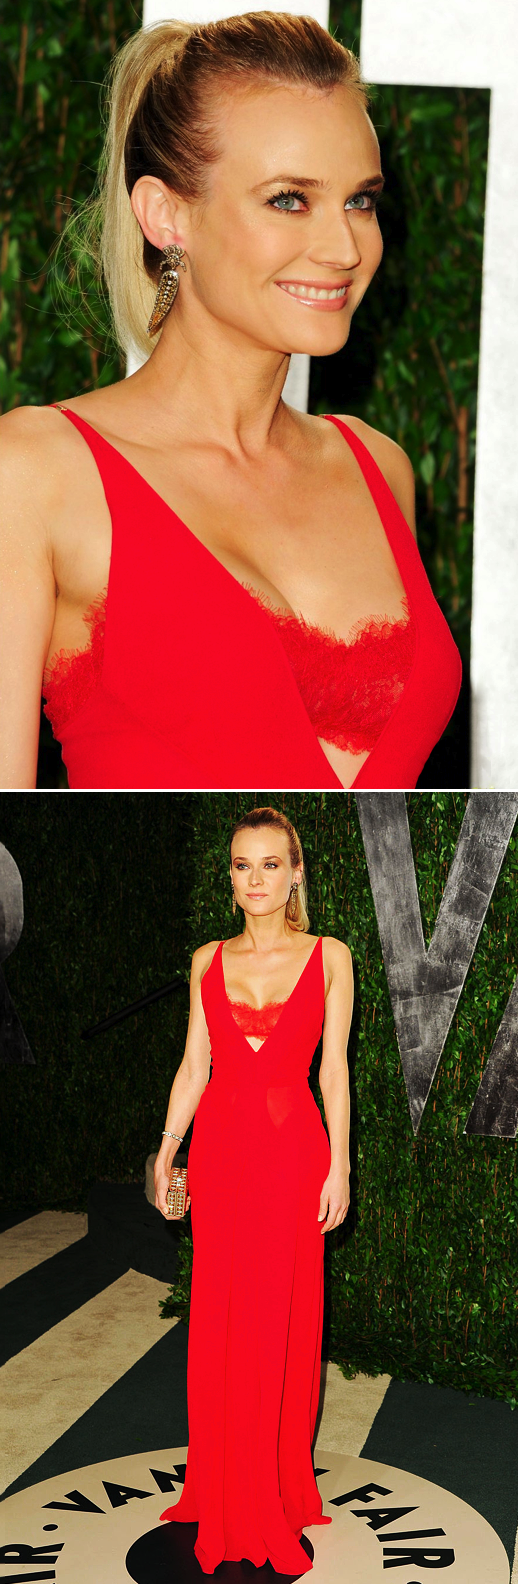 diane kruger in red calvin klein dress at vanity fair oscar party 2012 party via just- ared